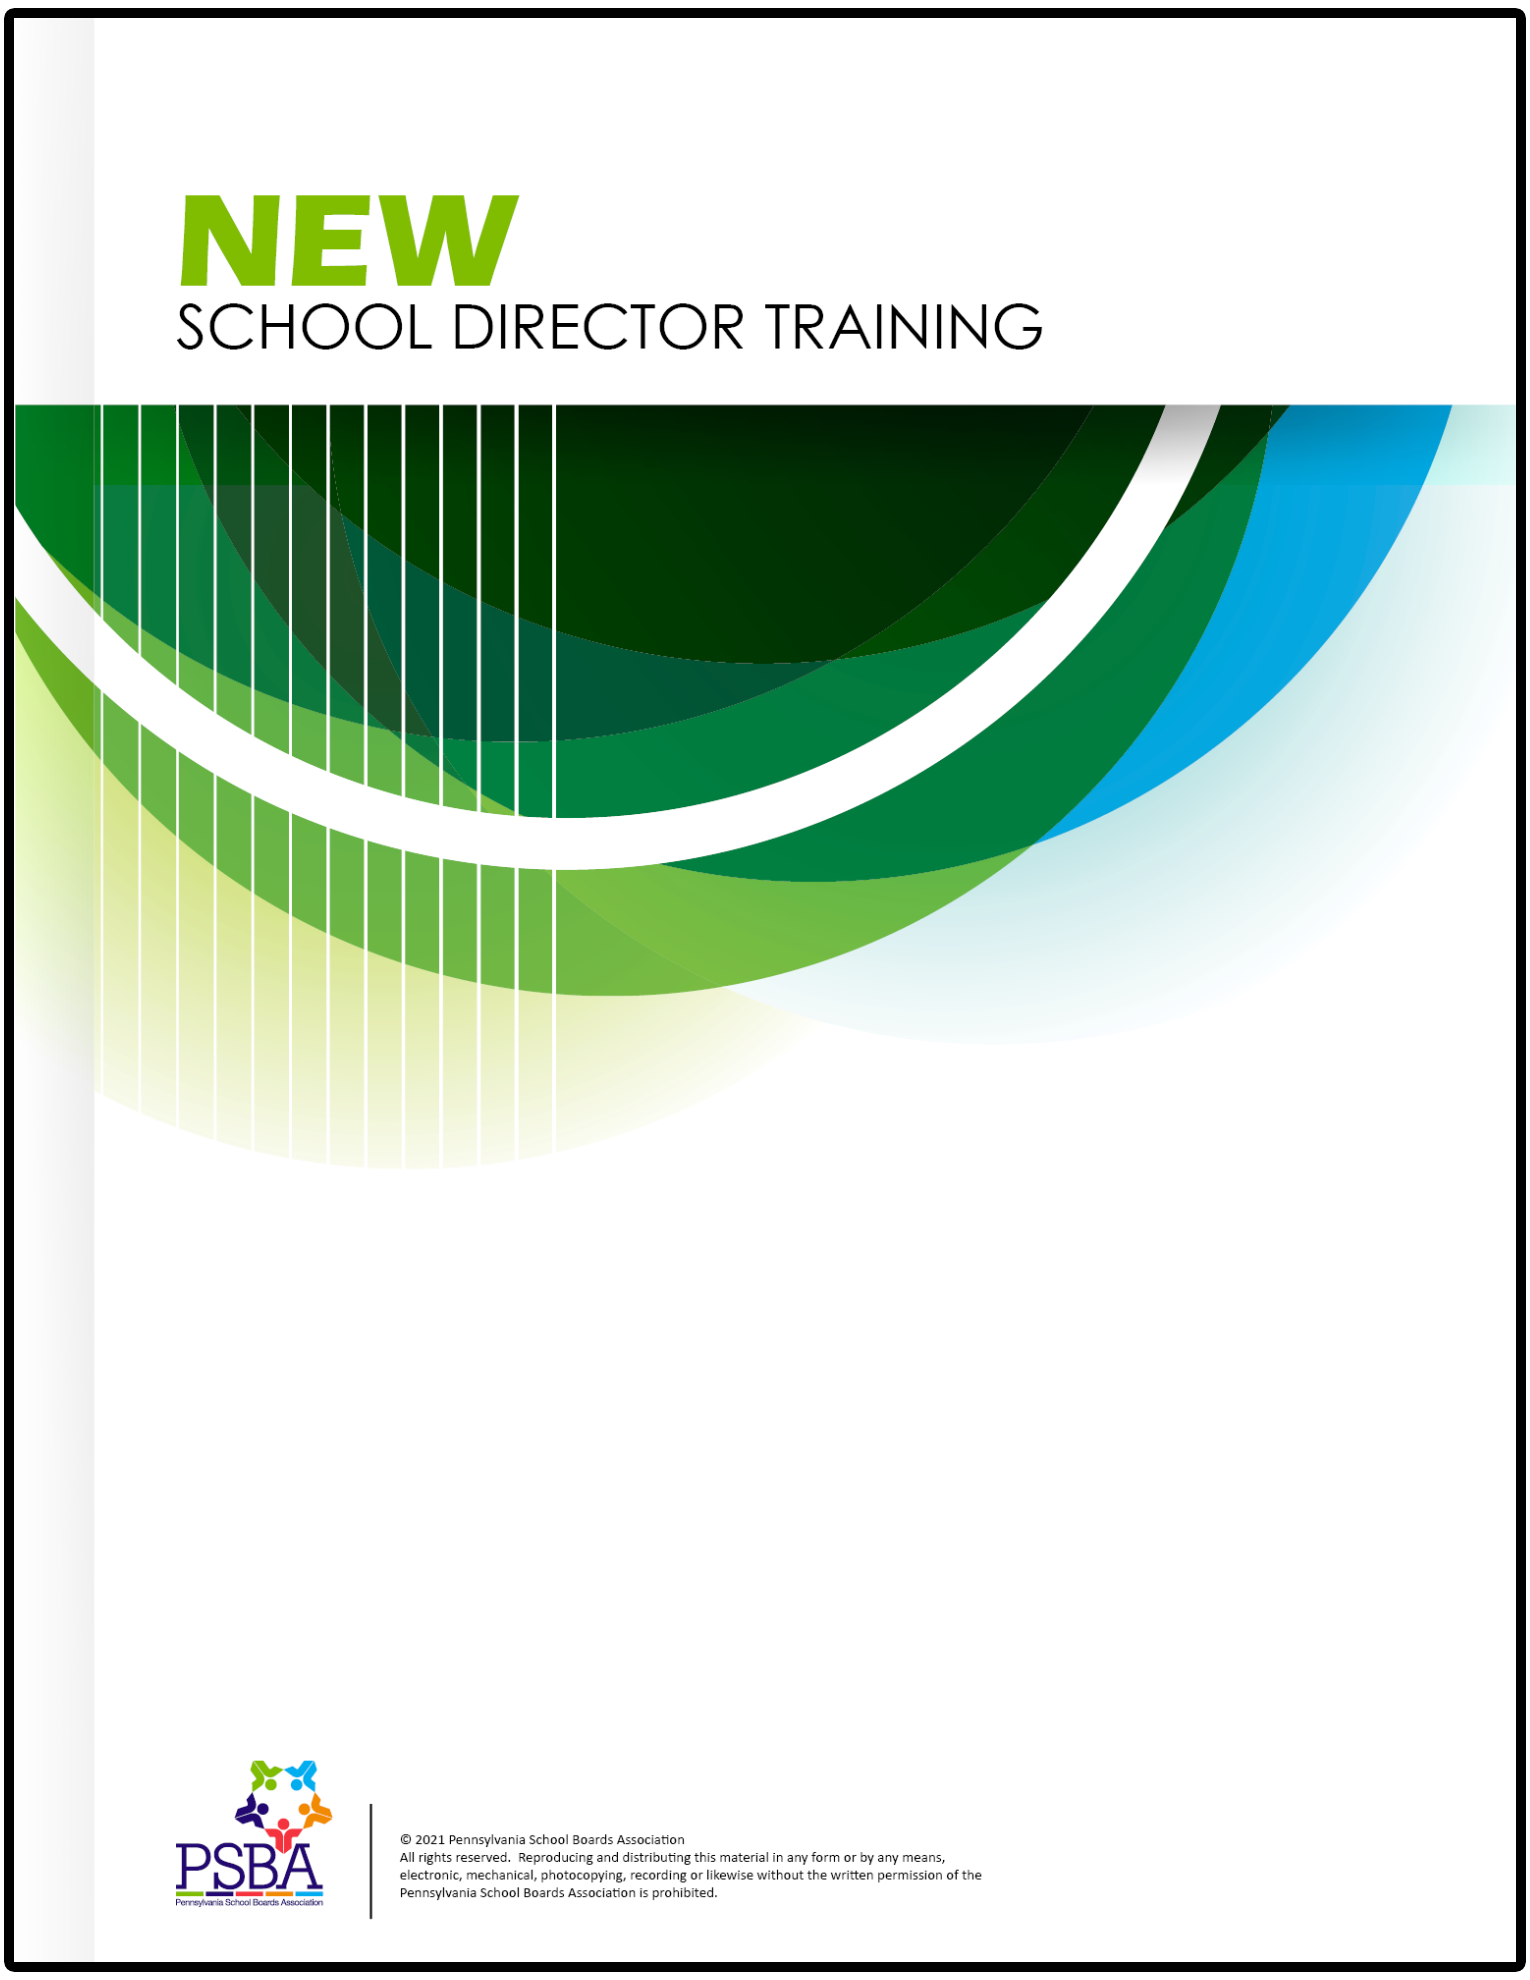 Click here to view the New School Director Training workbook